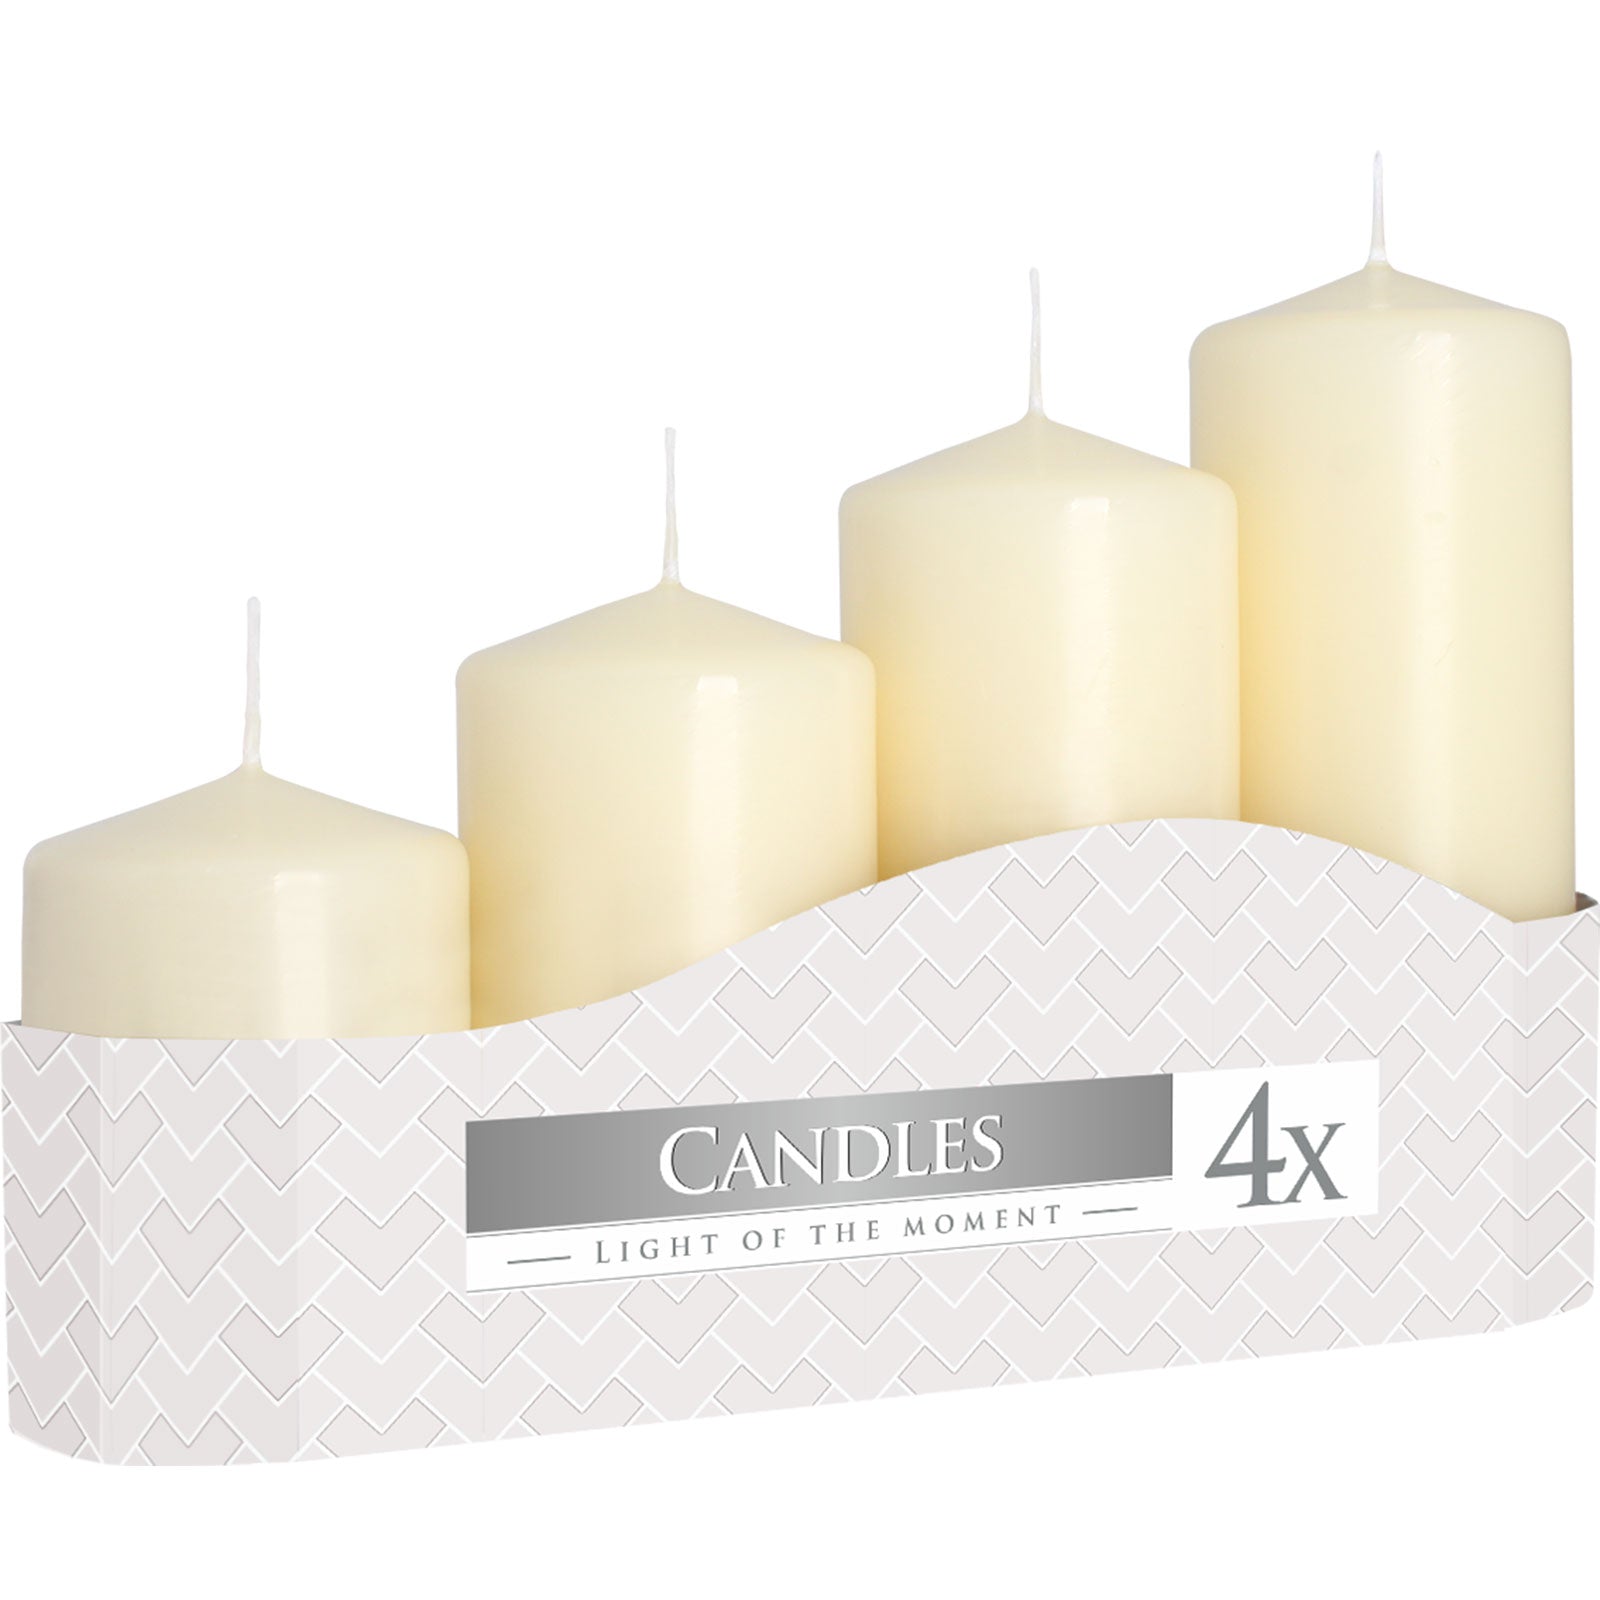 View Set of 4 Pillar Candles 50mm 11162233H Ivory information